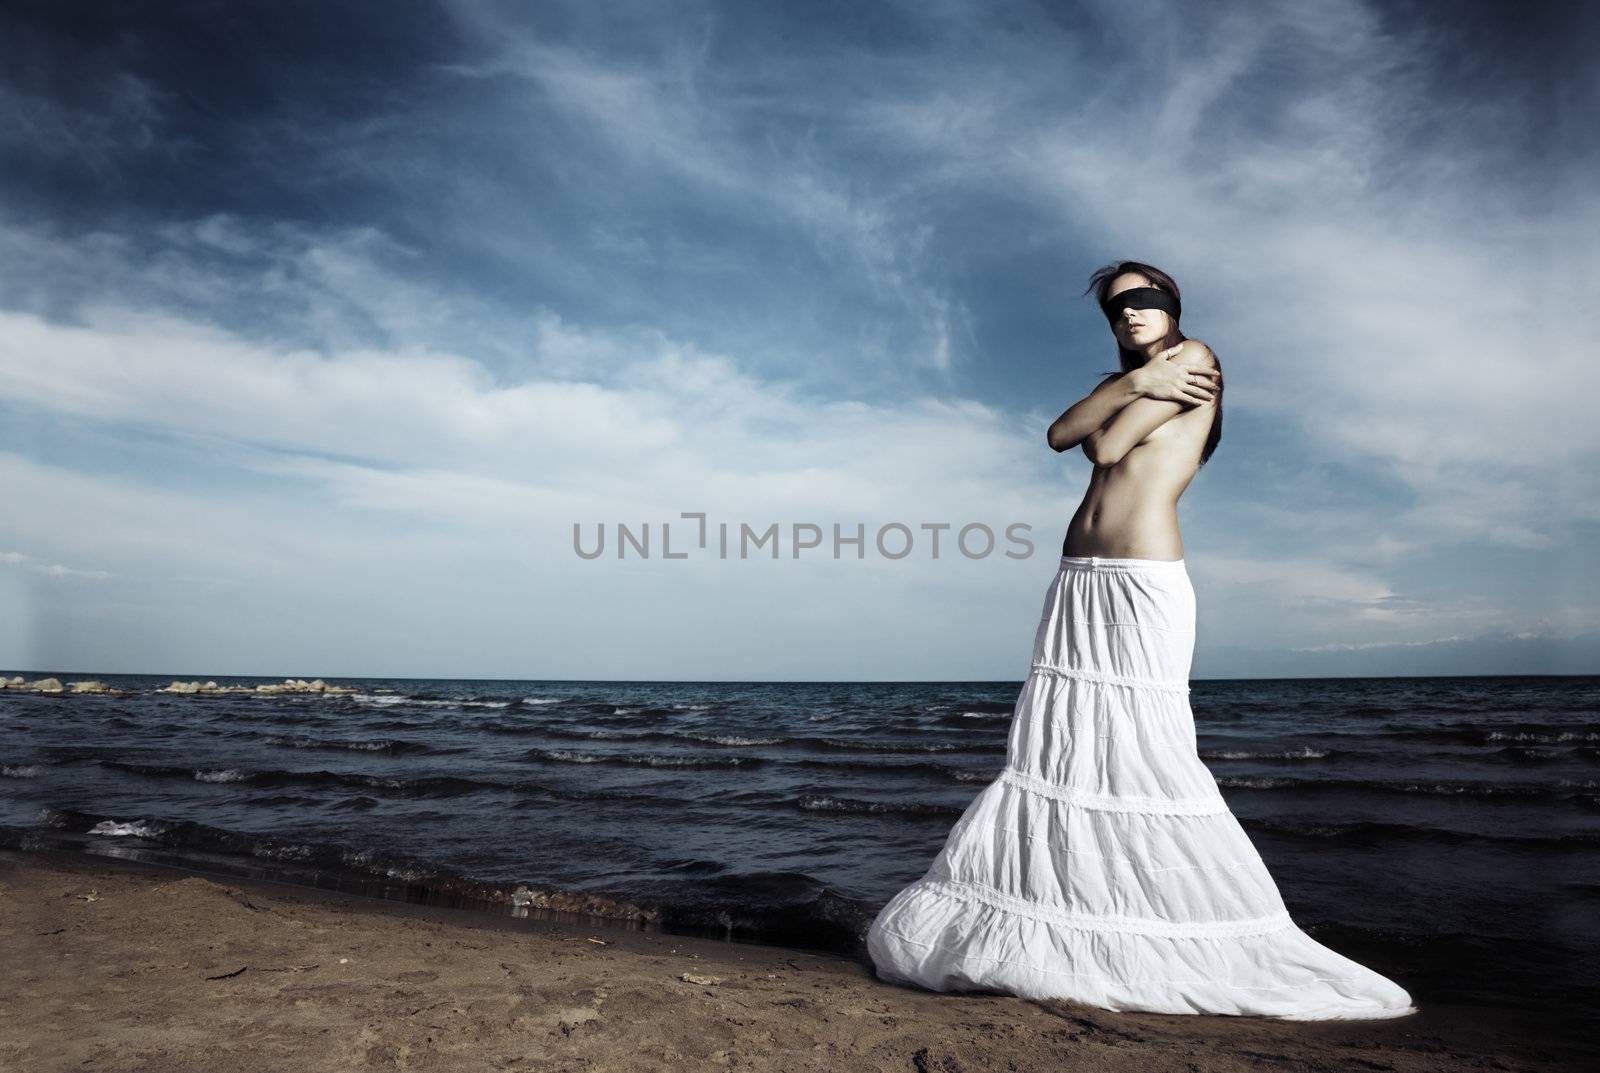 Lonely topless woman with blindfold standing at the beach